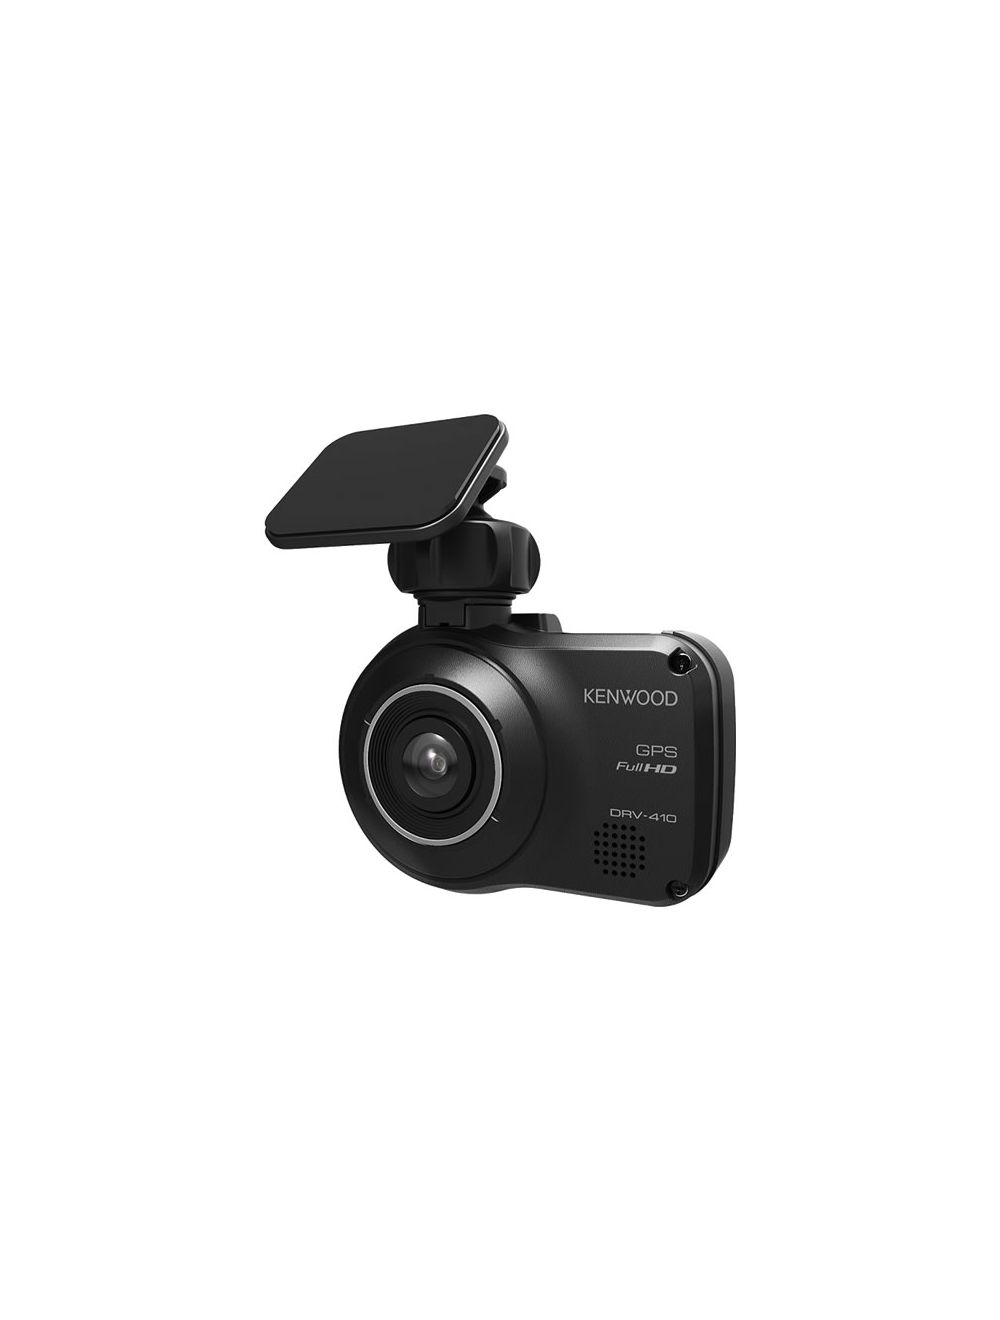  Kenwood DRV-A301W HD Car Dash cam with 2.7 Display, Parking  Mode Recording, Built-in GPS